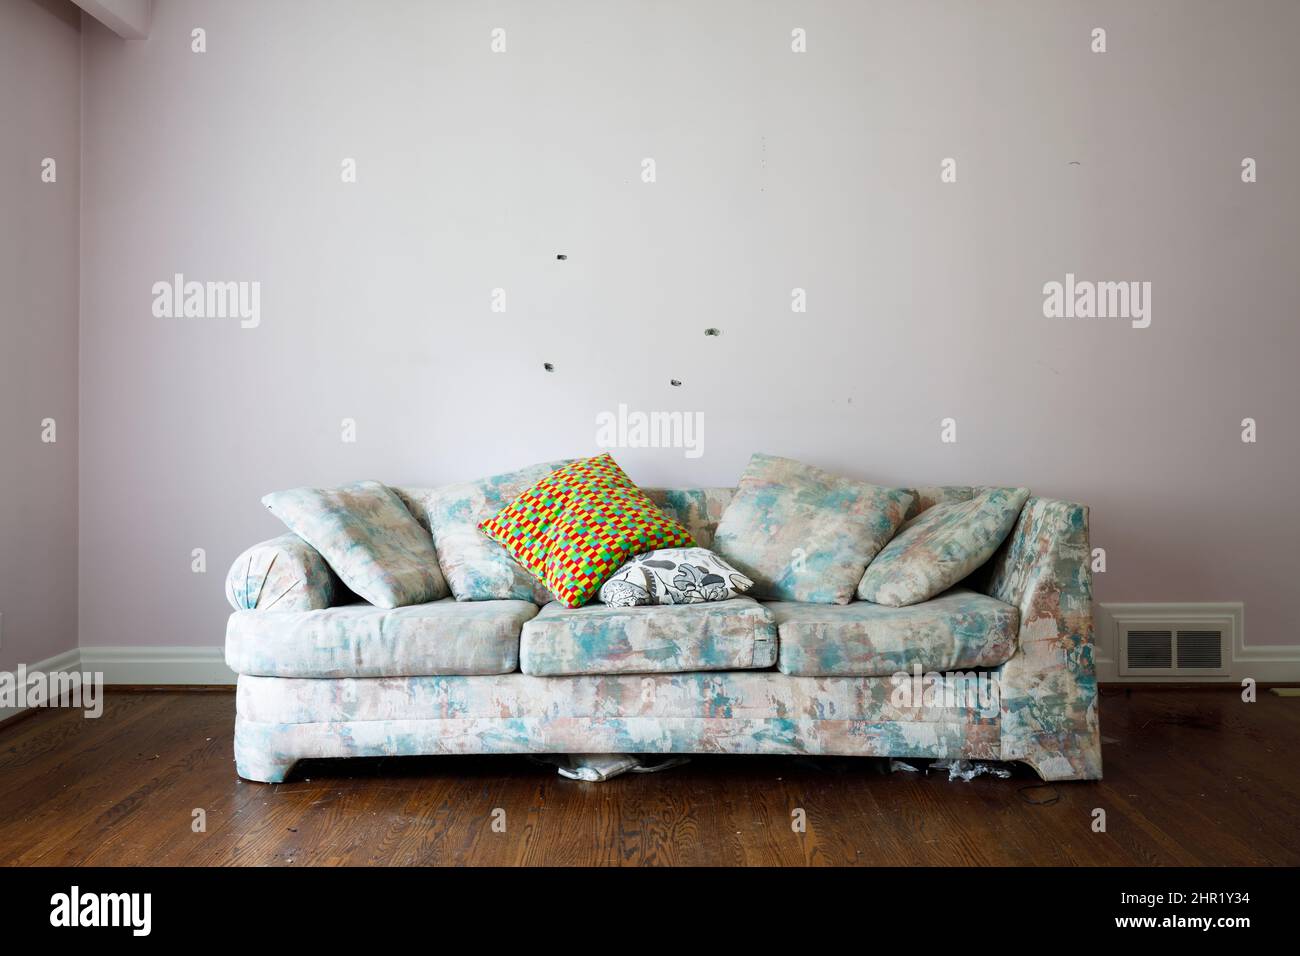 An ugly couch inside an otherwise empty room.  This house has been demolished. Stock Photo